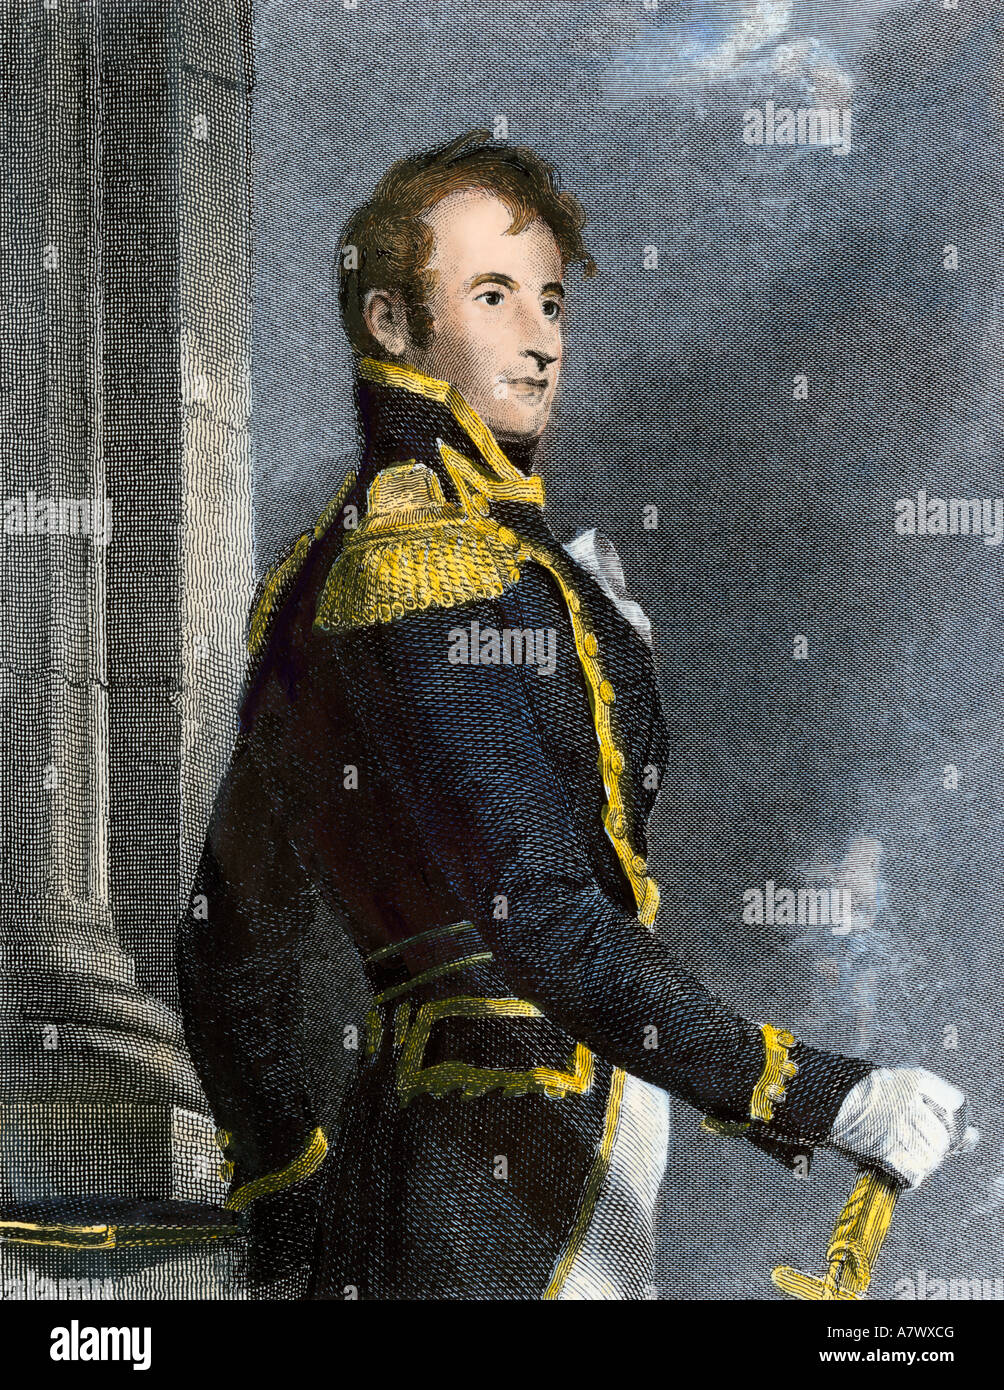 US Naval Commander Stephen Decatur. Hand-colored steel engraving Stock Photo